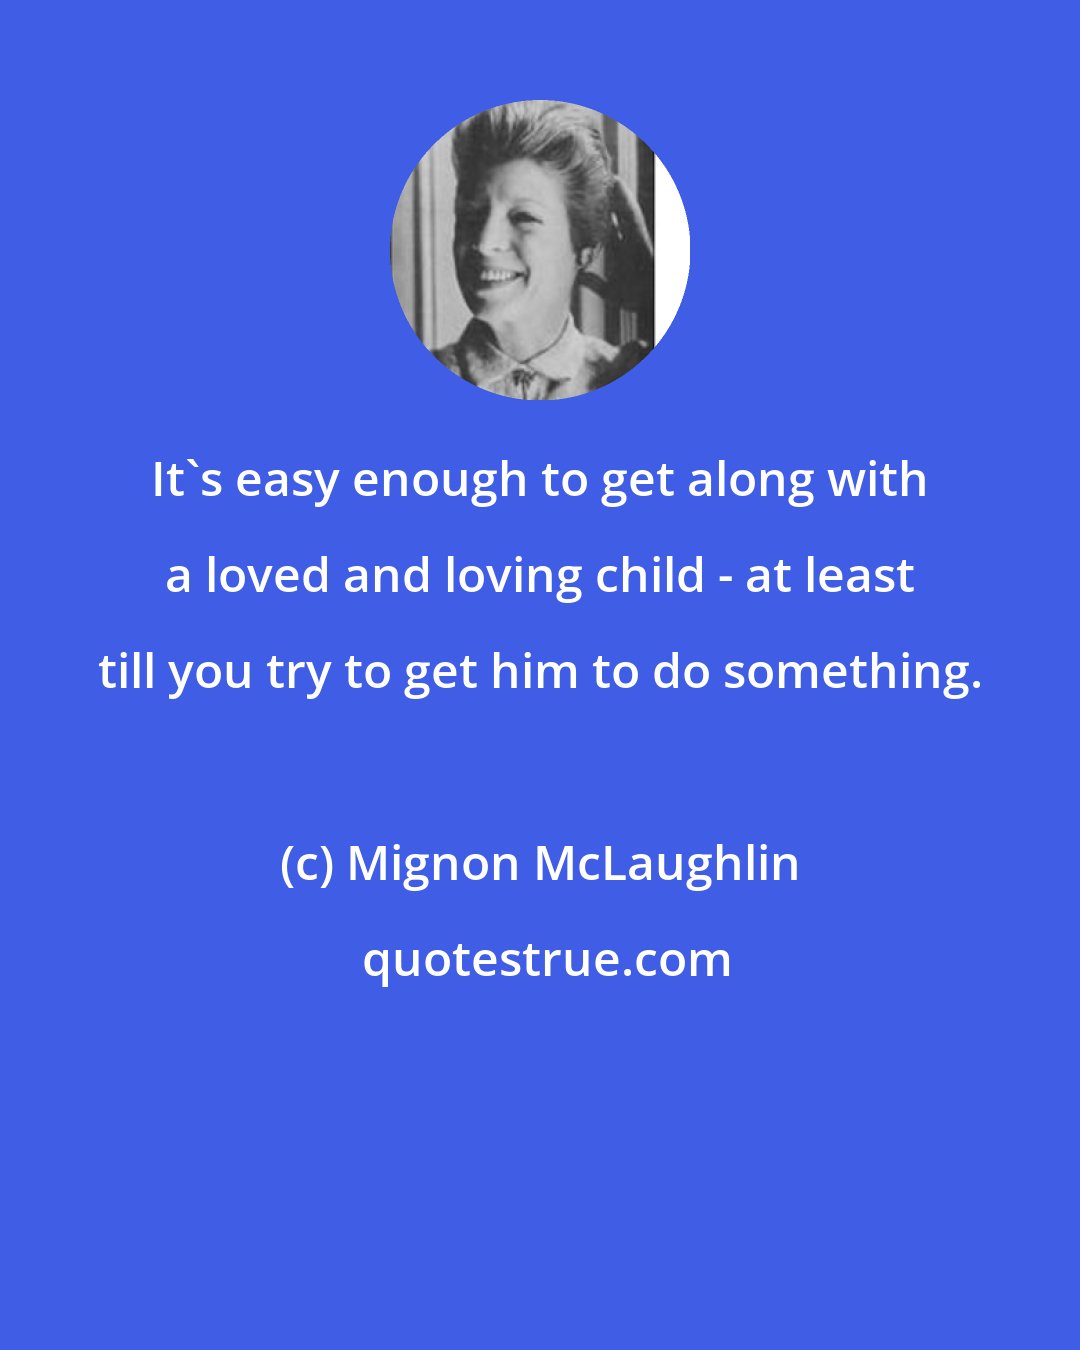 Mignon McLaughlin: It's easy enough to get along with a loved and loving child - at least till you try to get him to do something.